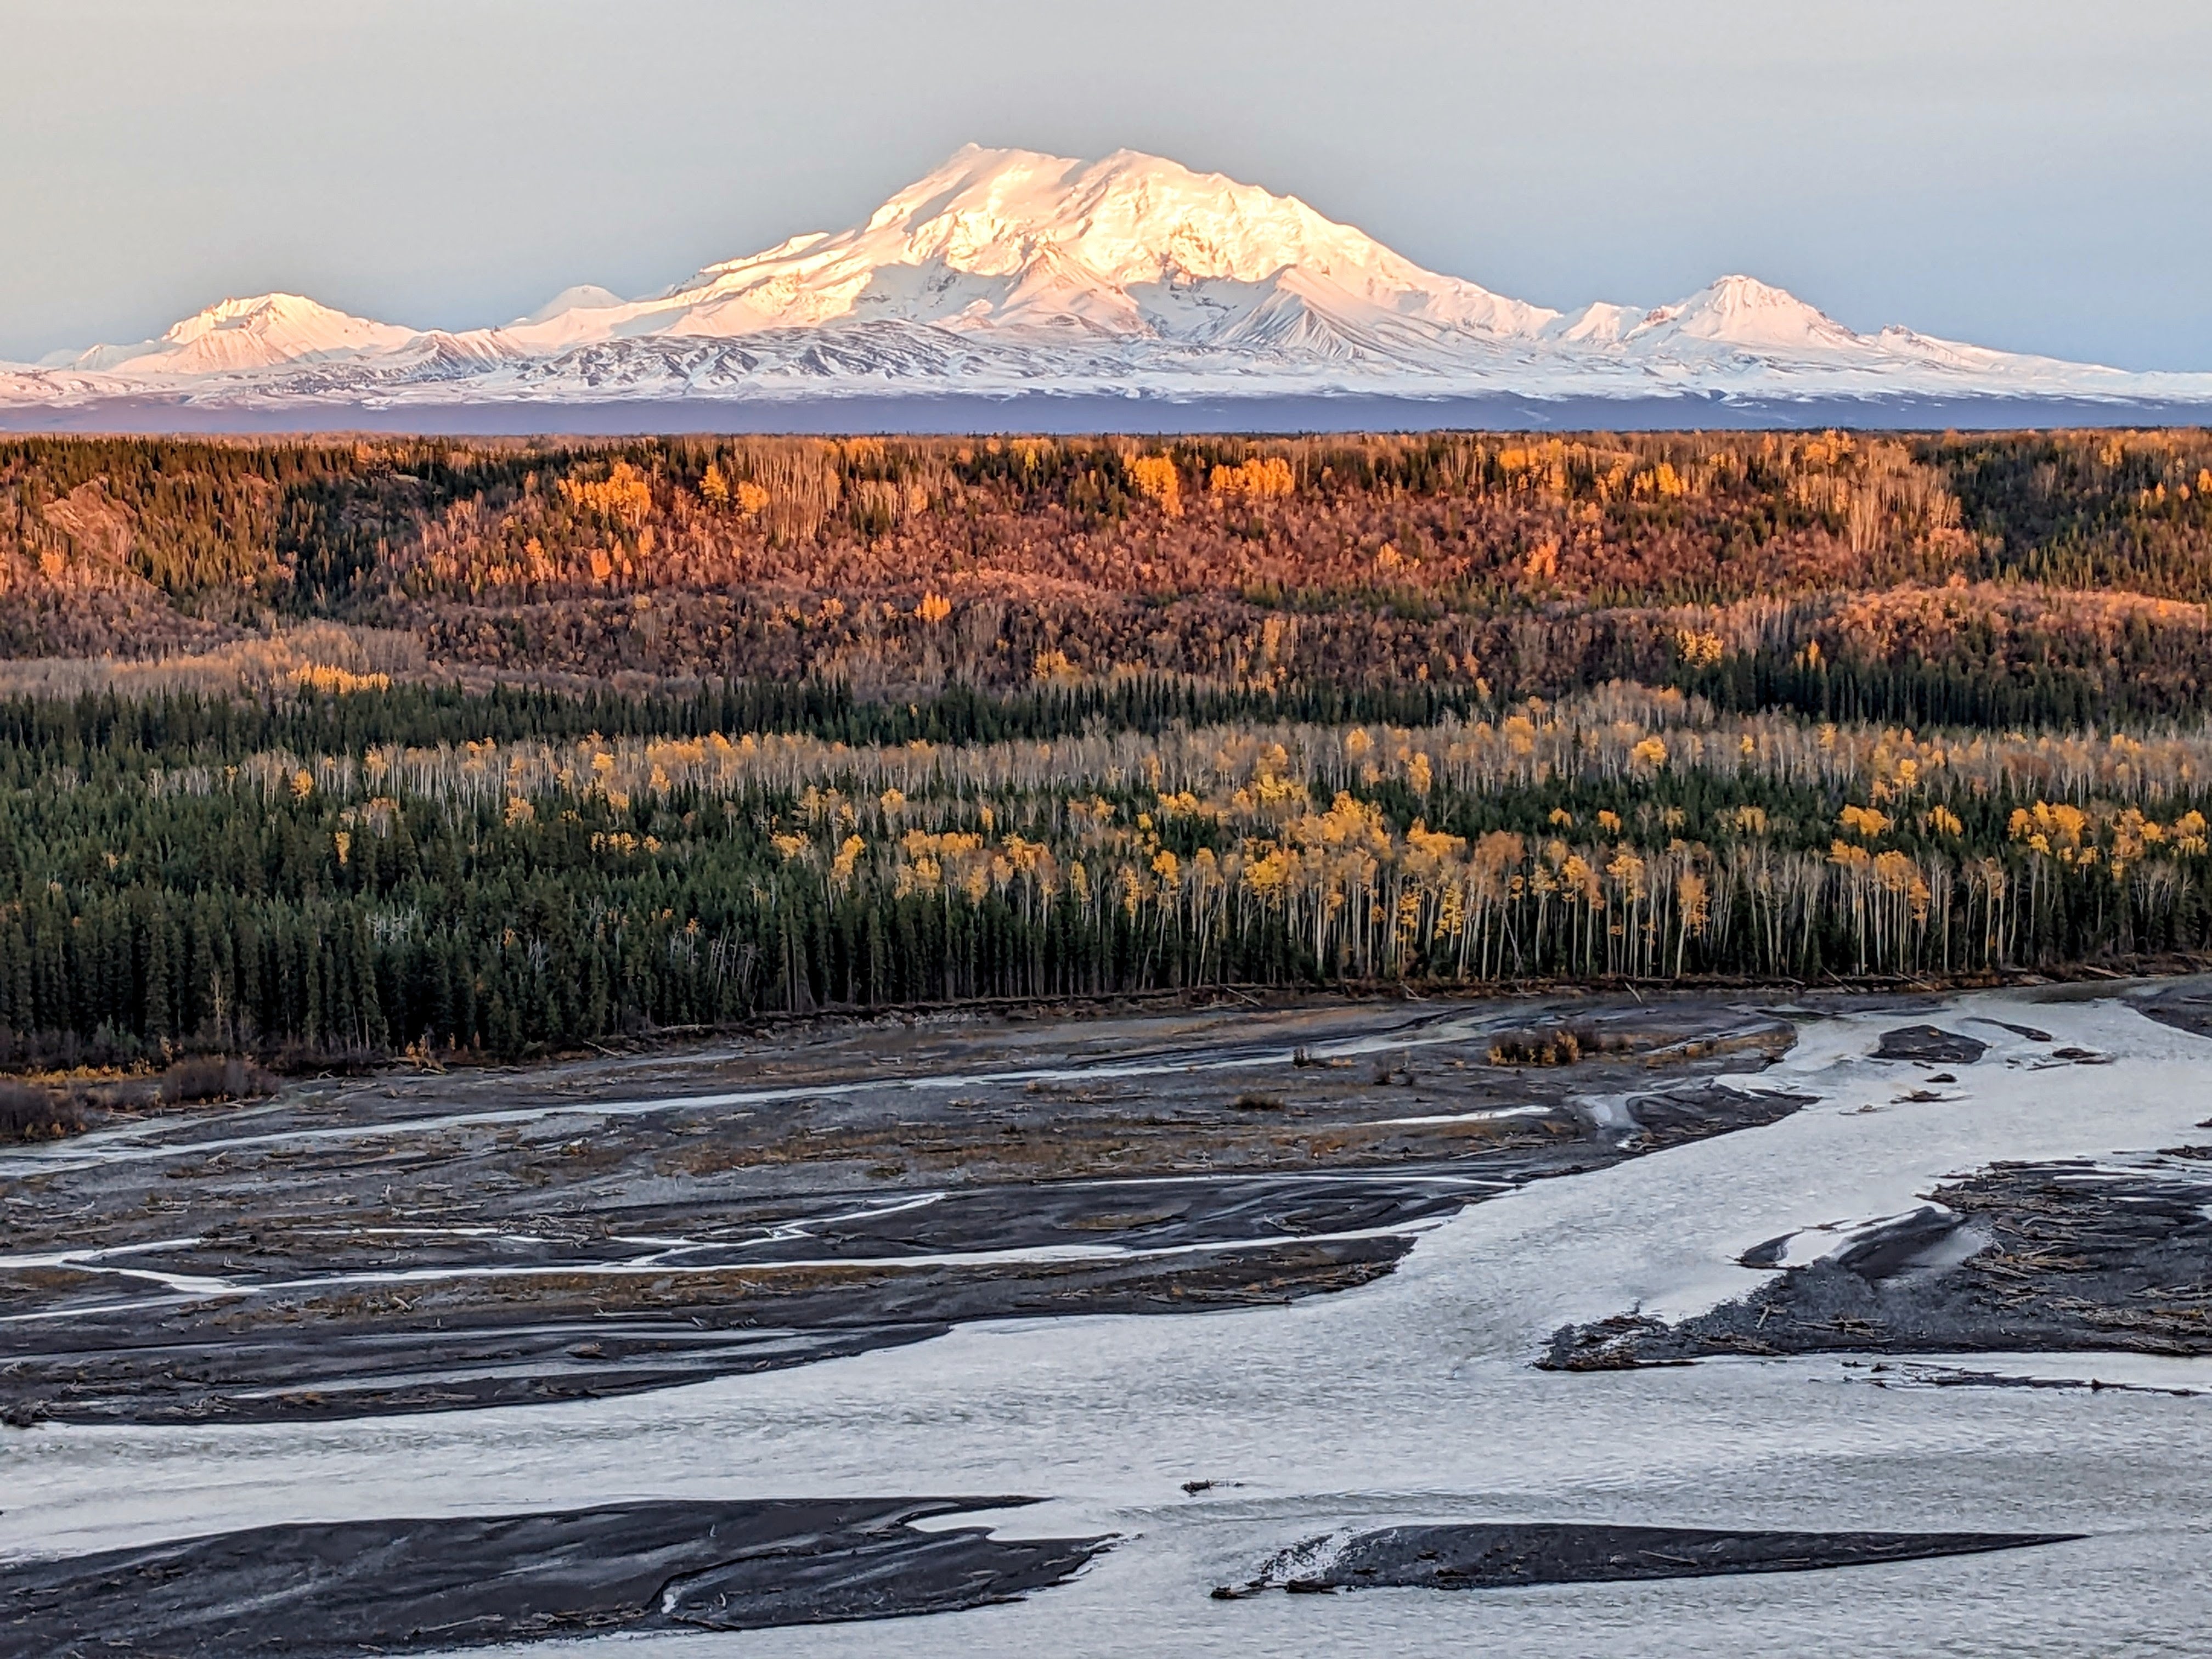 Camper submitted image from Nabesna Road Wrangell St. Elias National Park - 1